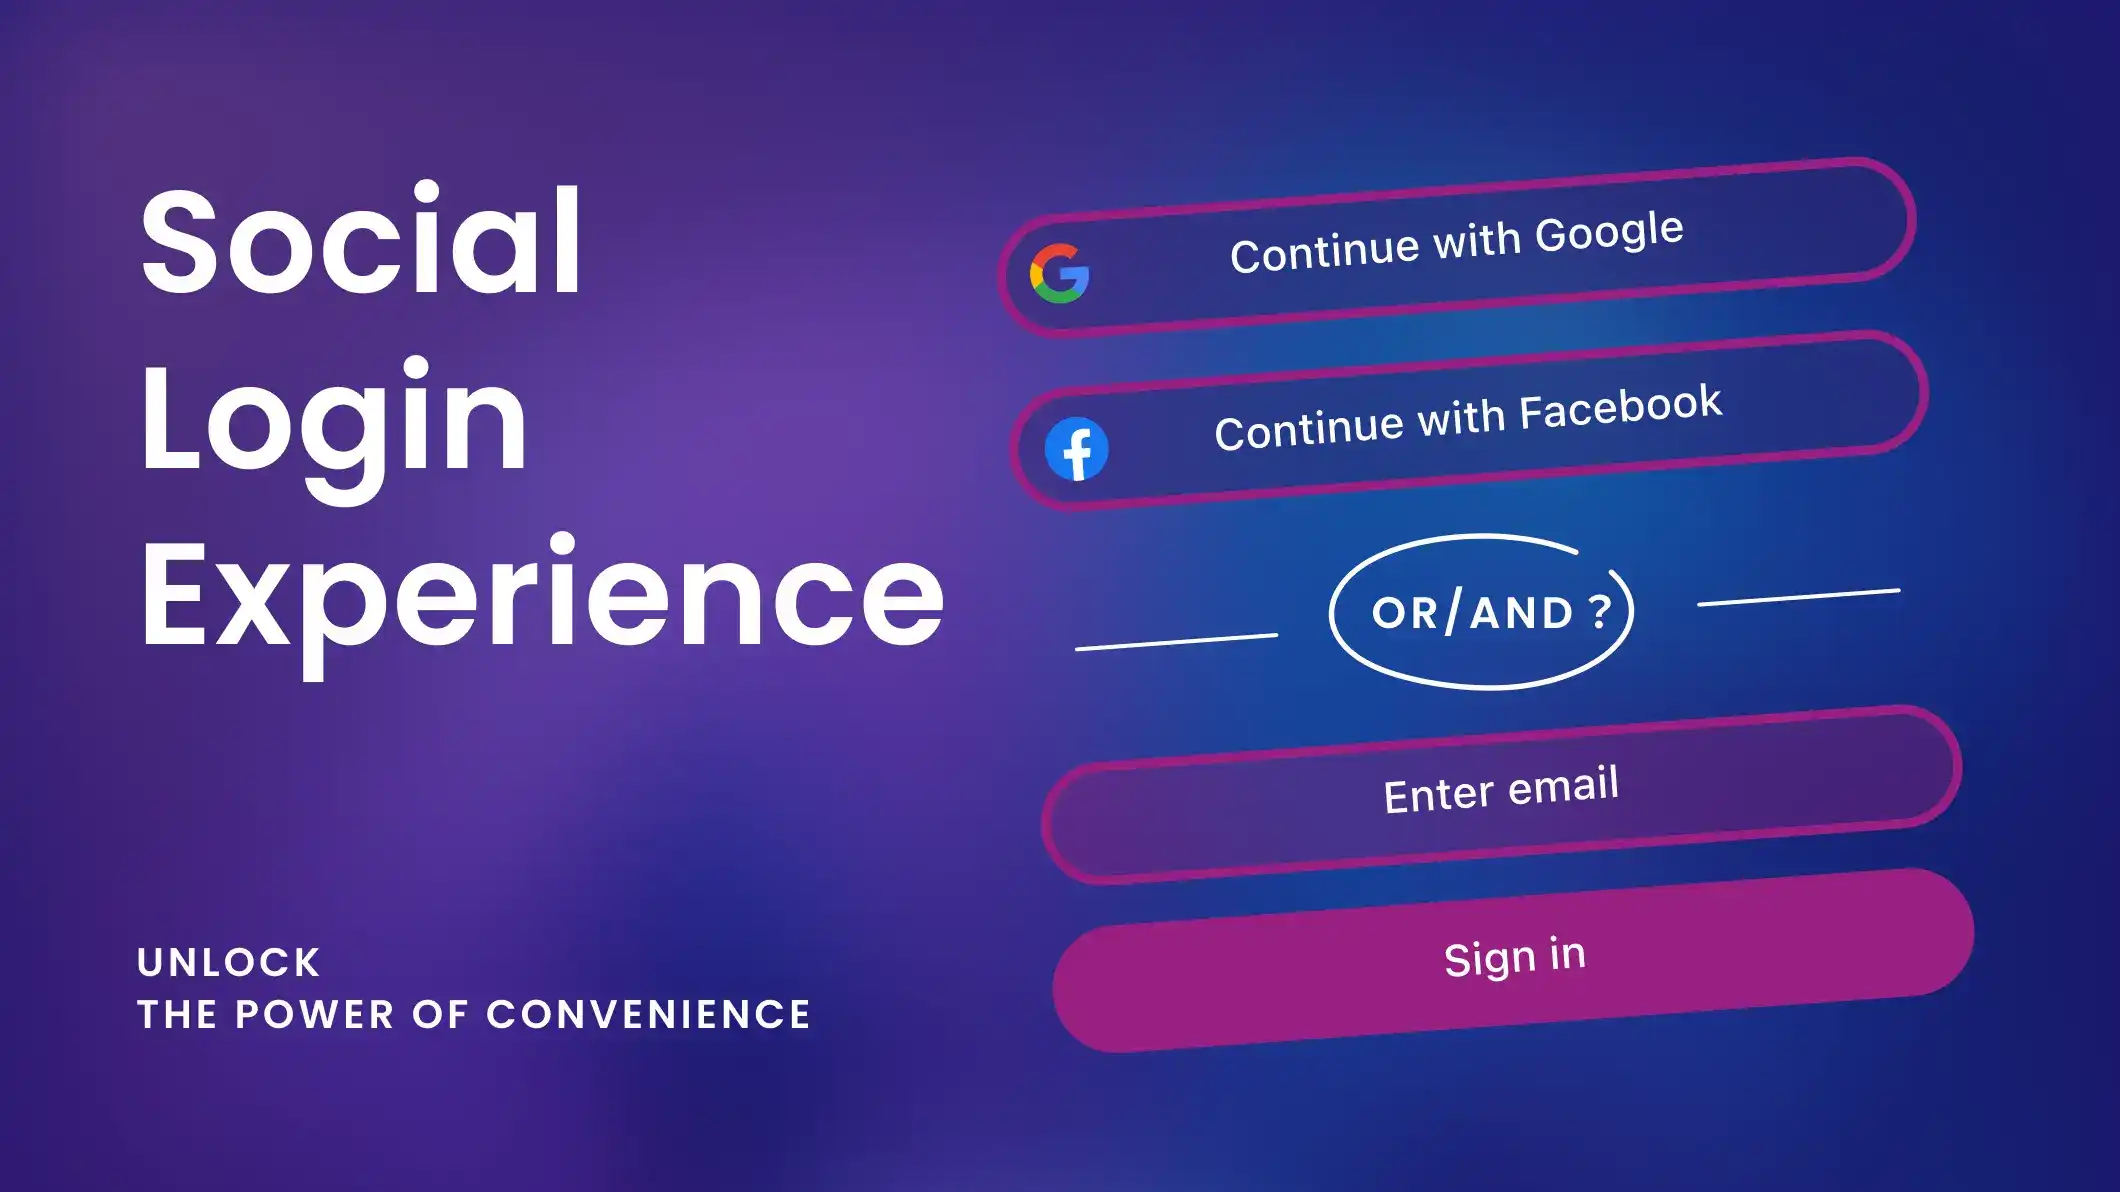 Tackle social login experience: Unlocking the power of convenience